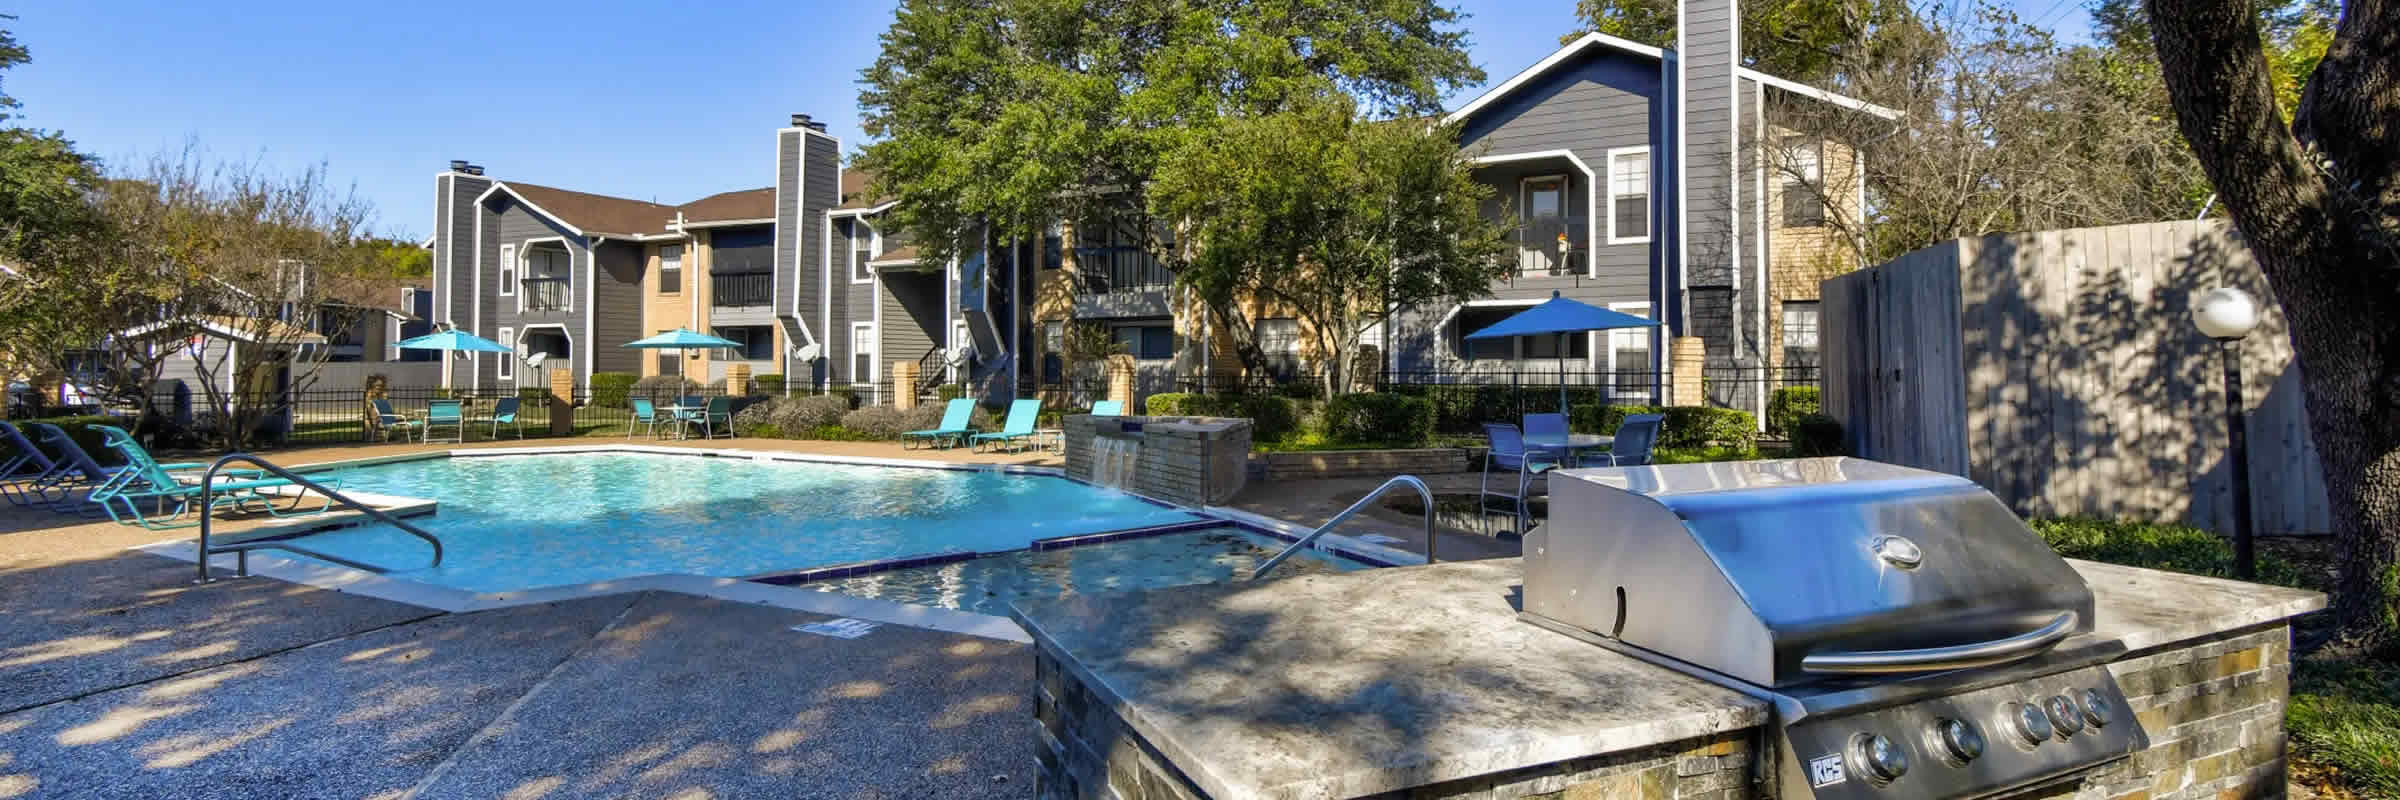 Pleasant Creek Apartments - FS Houses: Buy Sell Rent